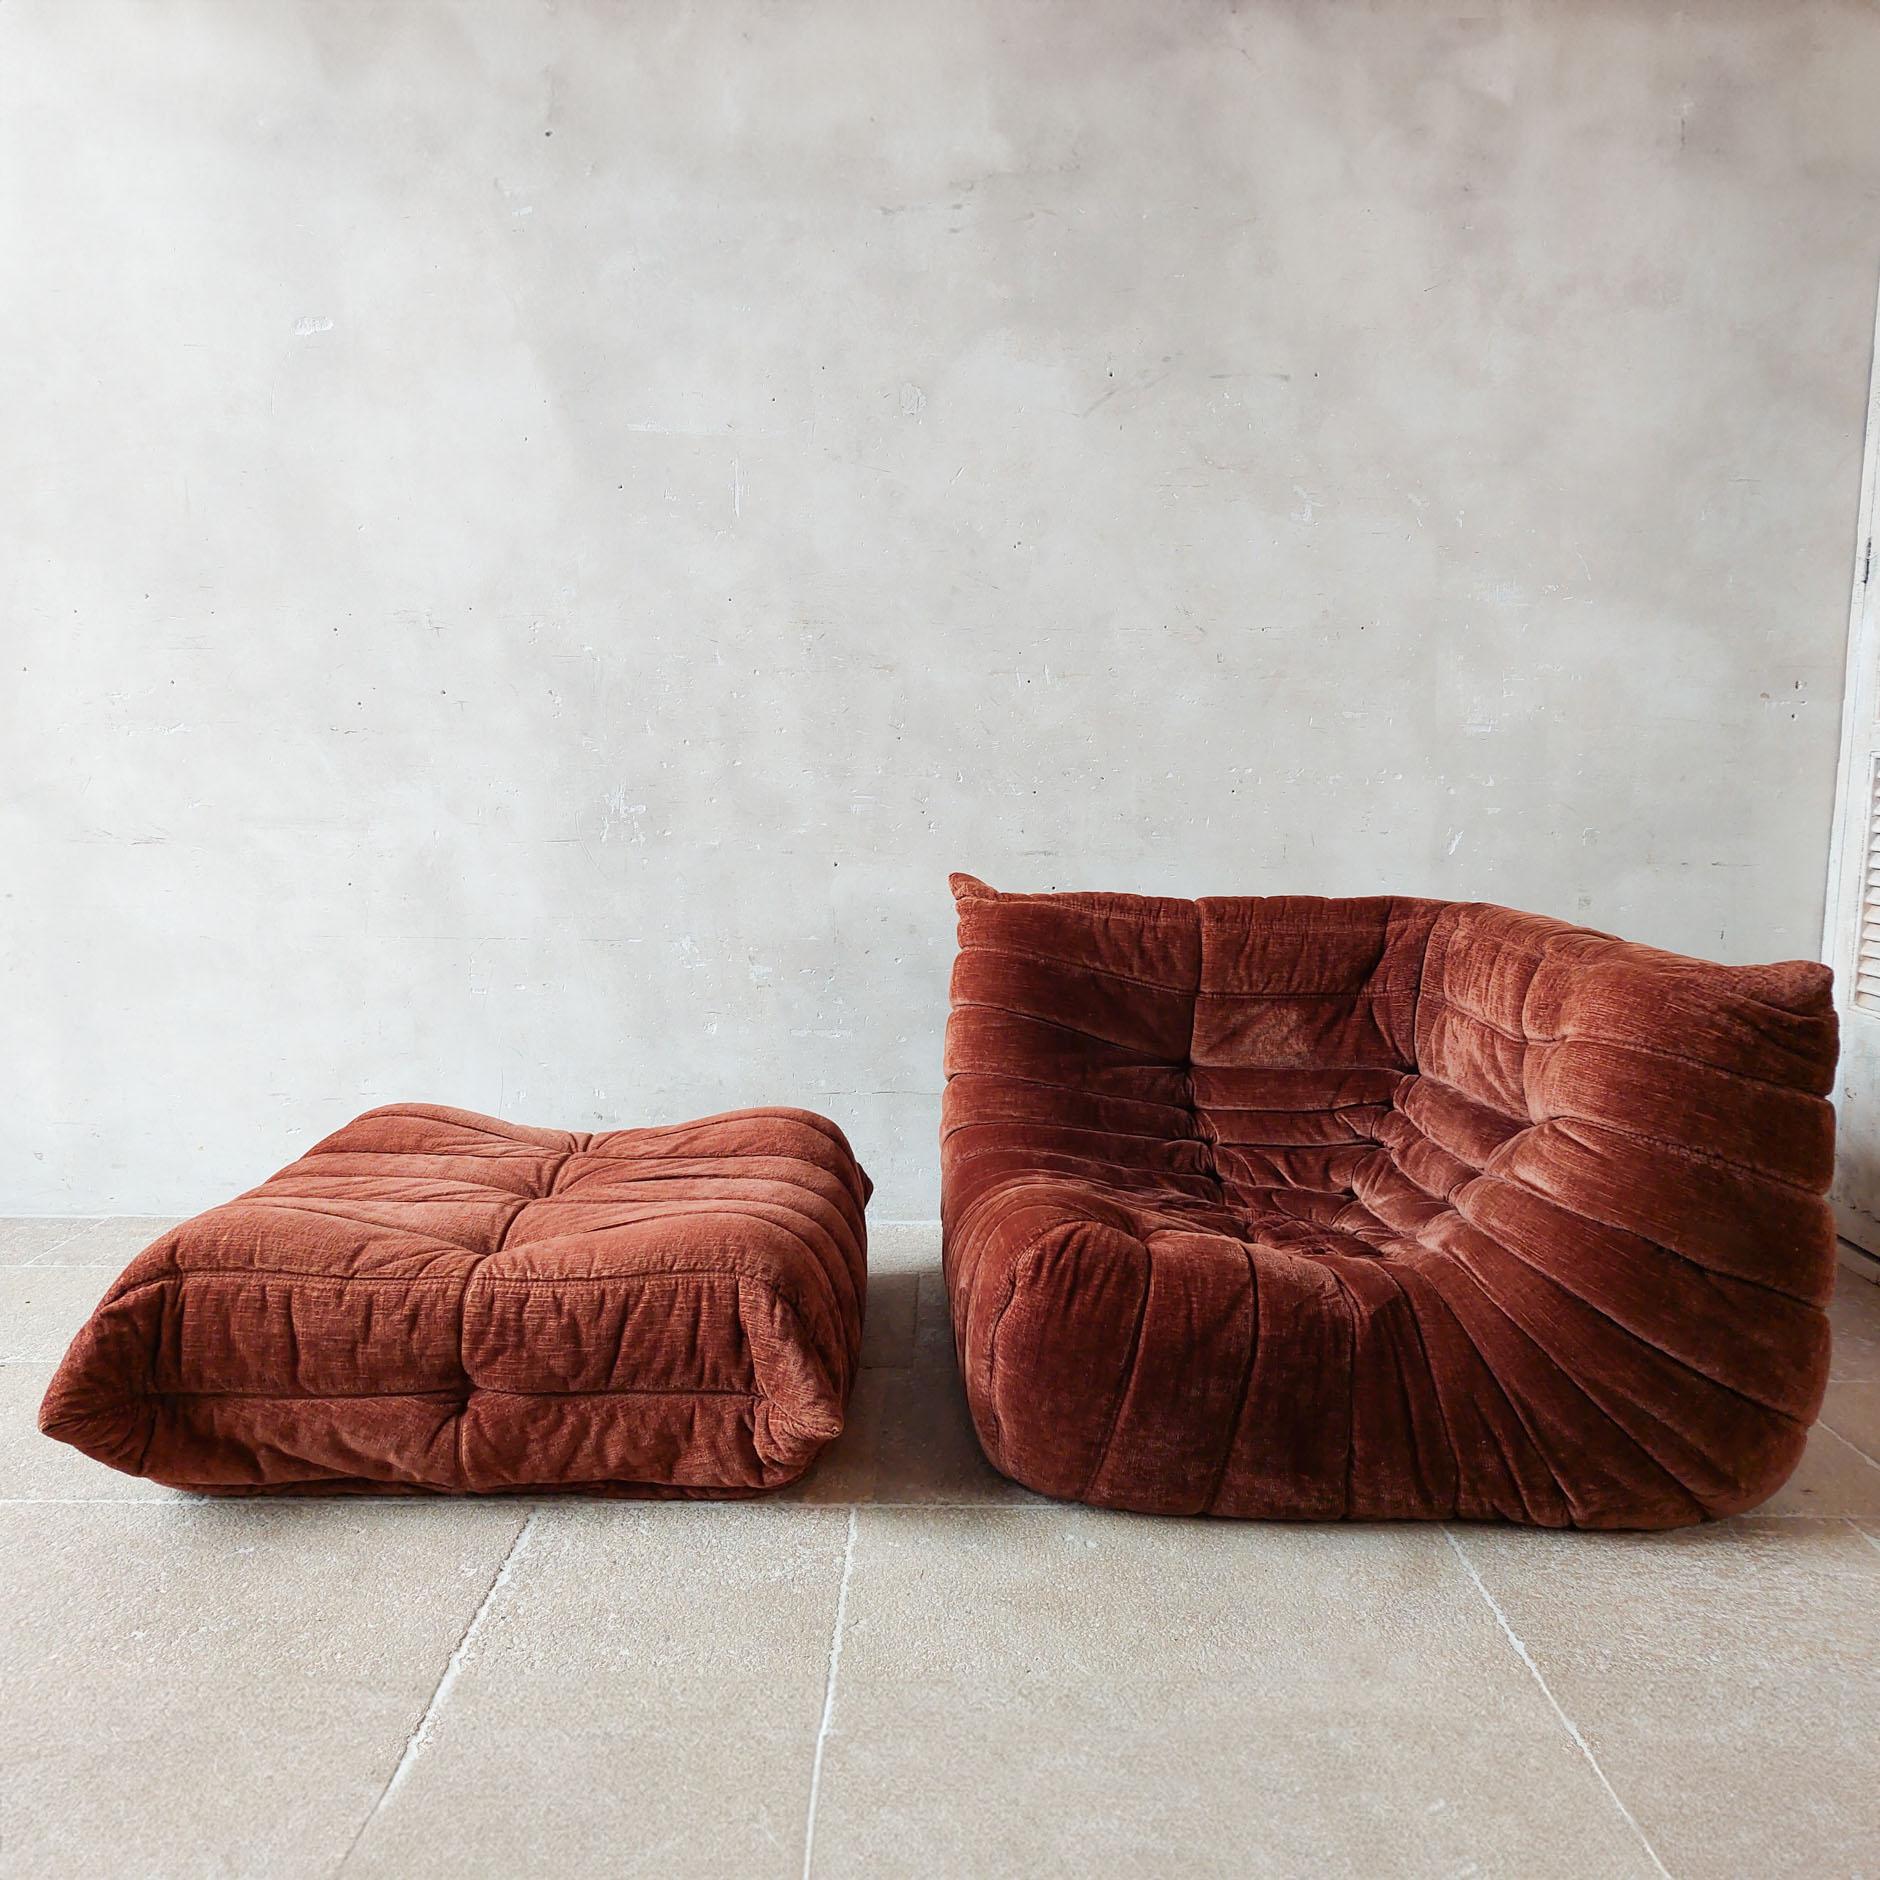 Vintage Togo sofa set, designed by Michel Ducaroy in the 1970s and manufactured by Ligne Roset in France. This iconic corner armchair with ottoman features original cognac brown velvet upholstery, embodying both timeless style and comfort.

Crafted